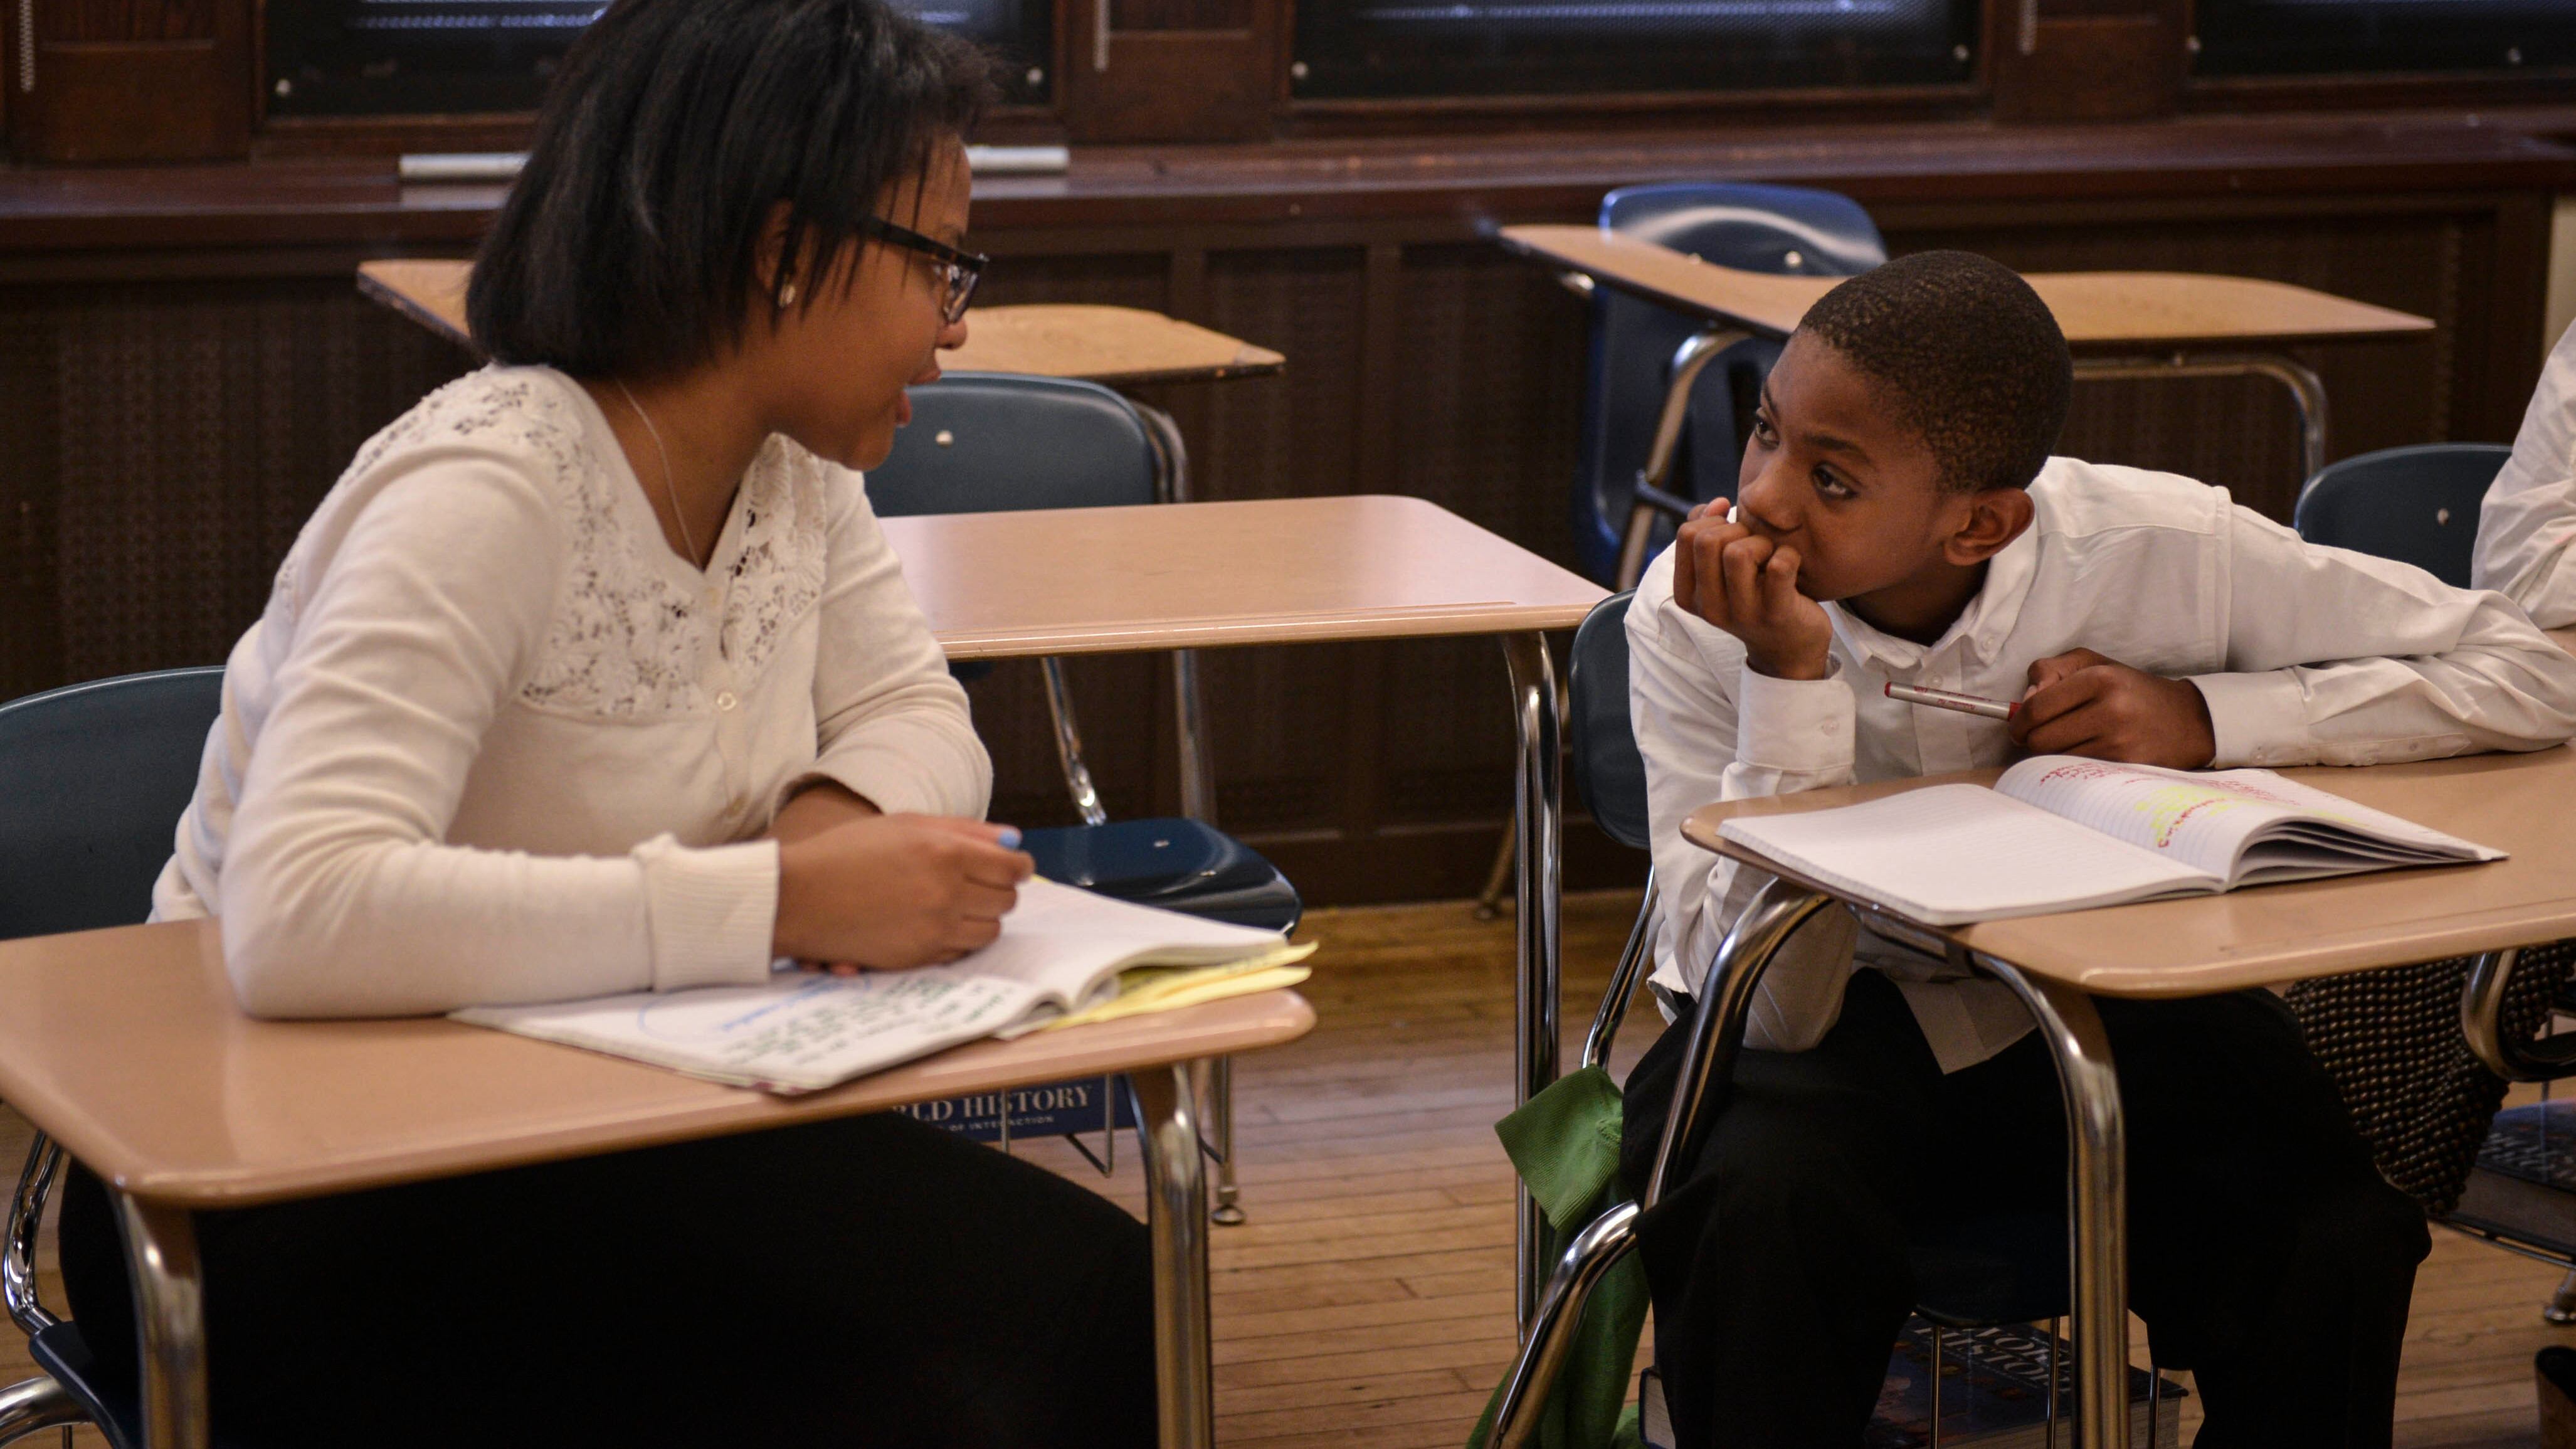 A student and a teacher sit at desks and talk to each other in a classroom while workbooks are open in front of them.